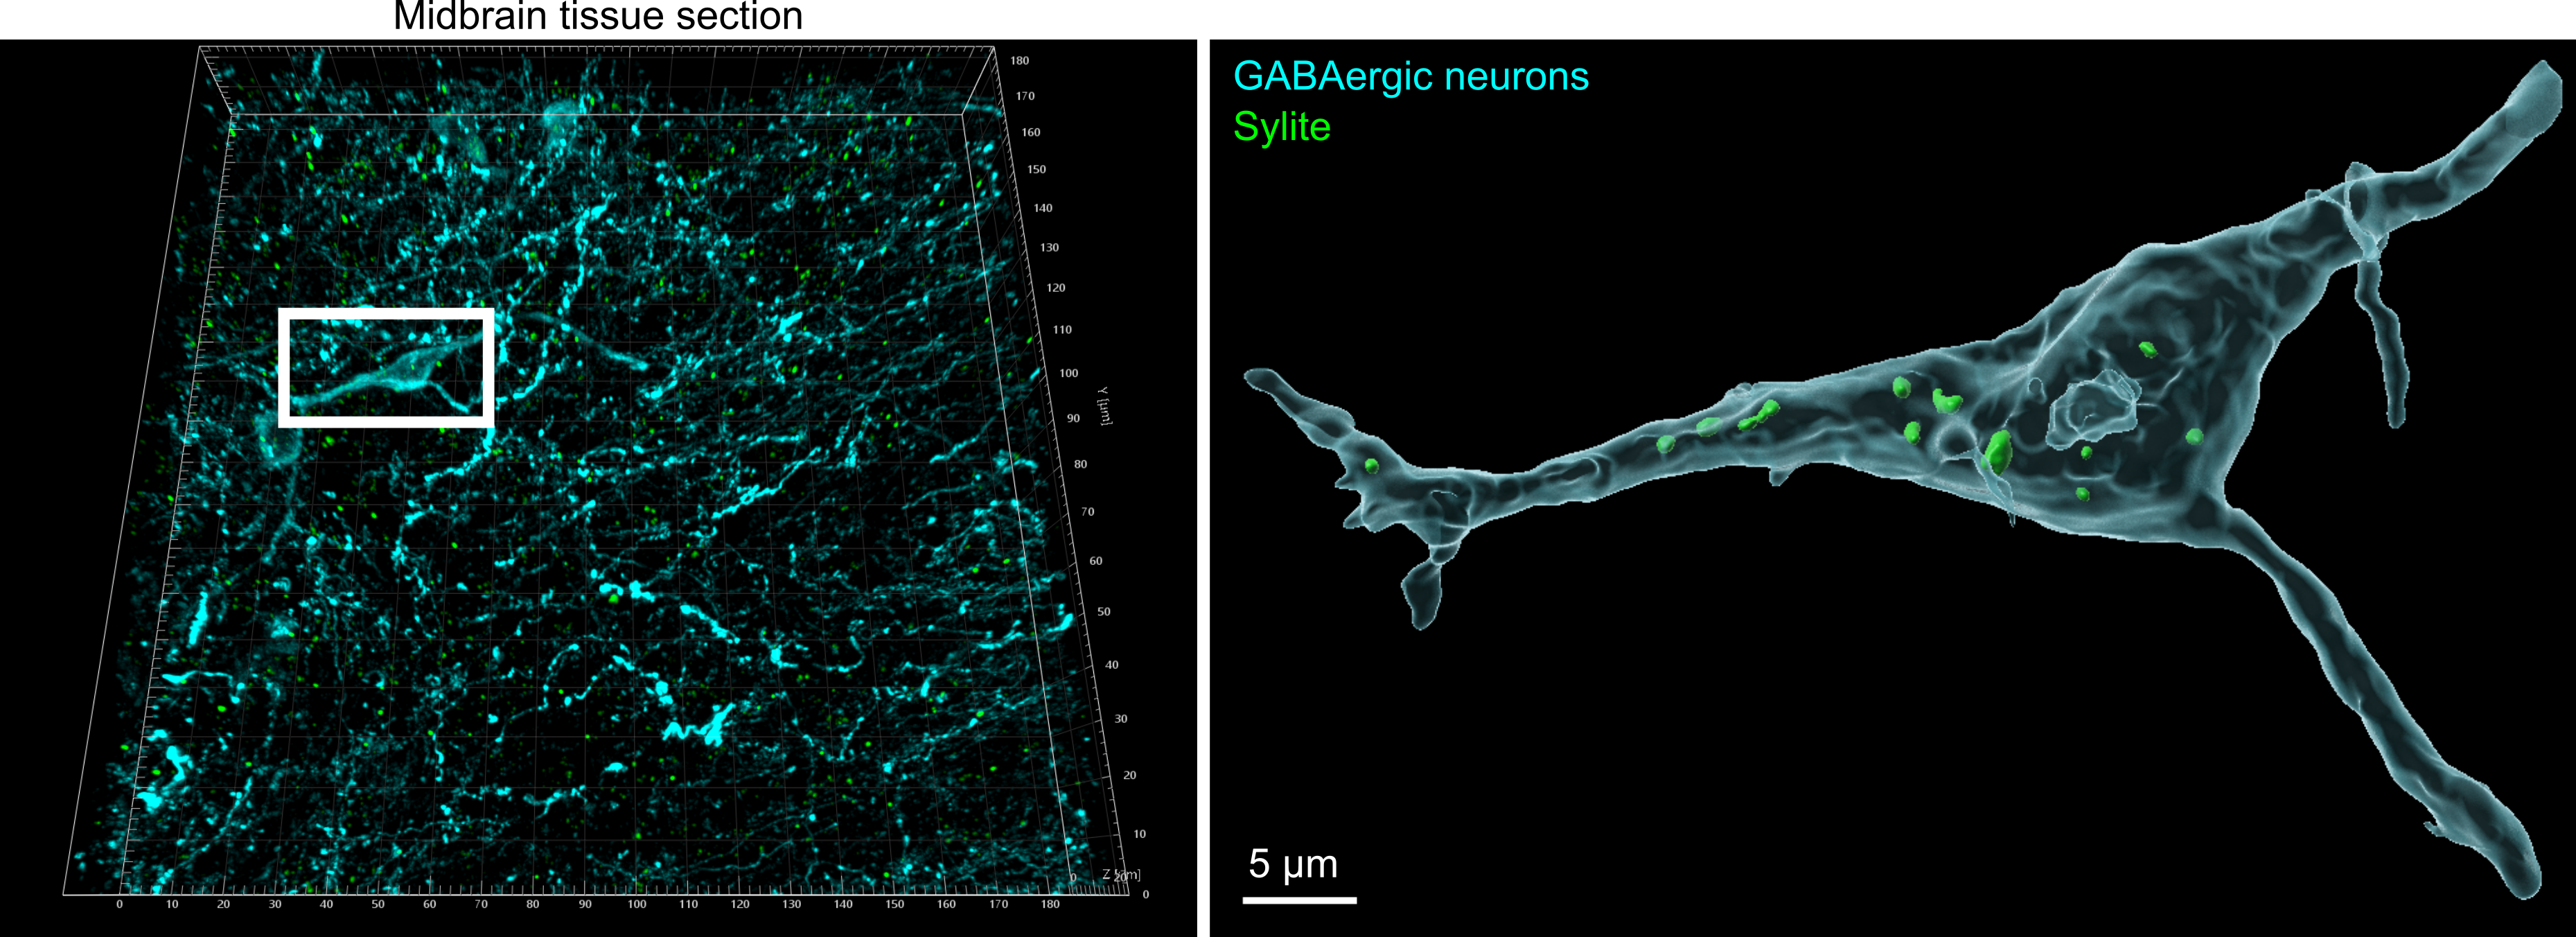 Sylite staining (green) of a periaqueductal gray midbrain section, GABAergic neurons are visualized in light blue. Boxed: 3D volumetric reconstruction of a single GABAergic neuron cell body from the brain section, multiple inhibitory synapses are effectively visualized in the soma after a simple one-step staining protocol. Scale bar 5 μm.